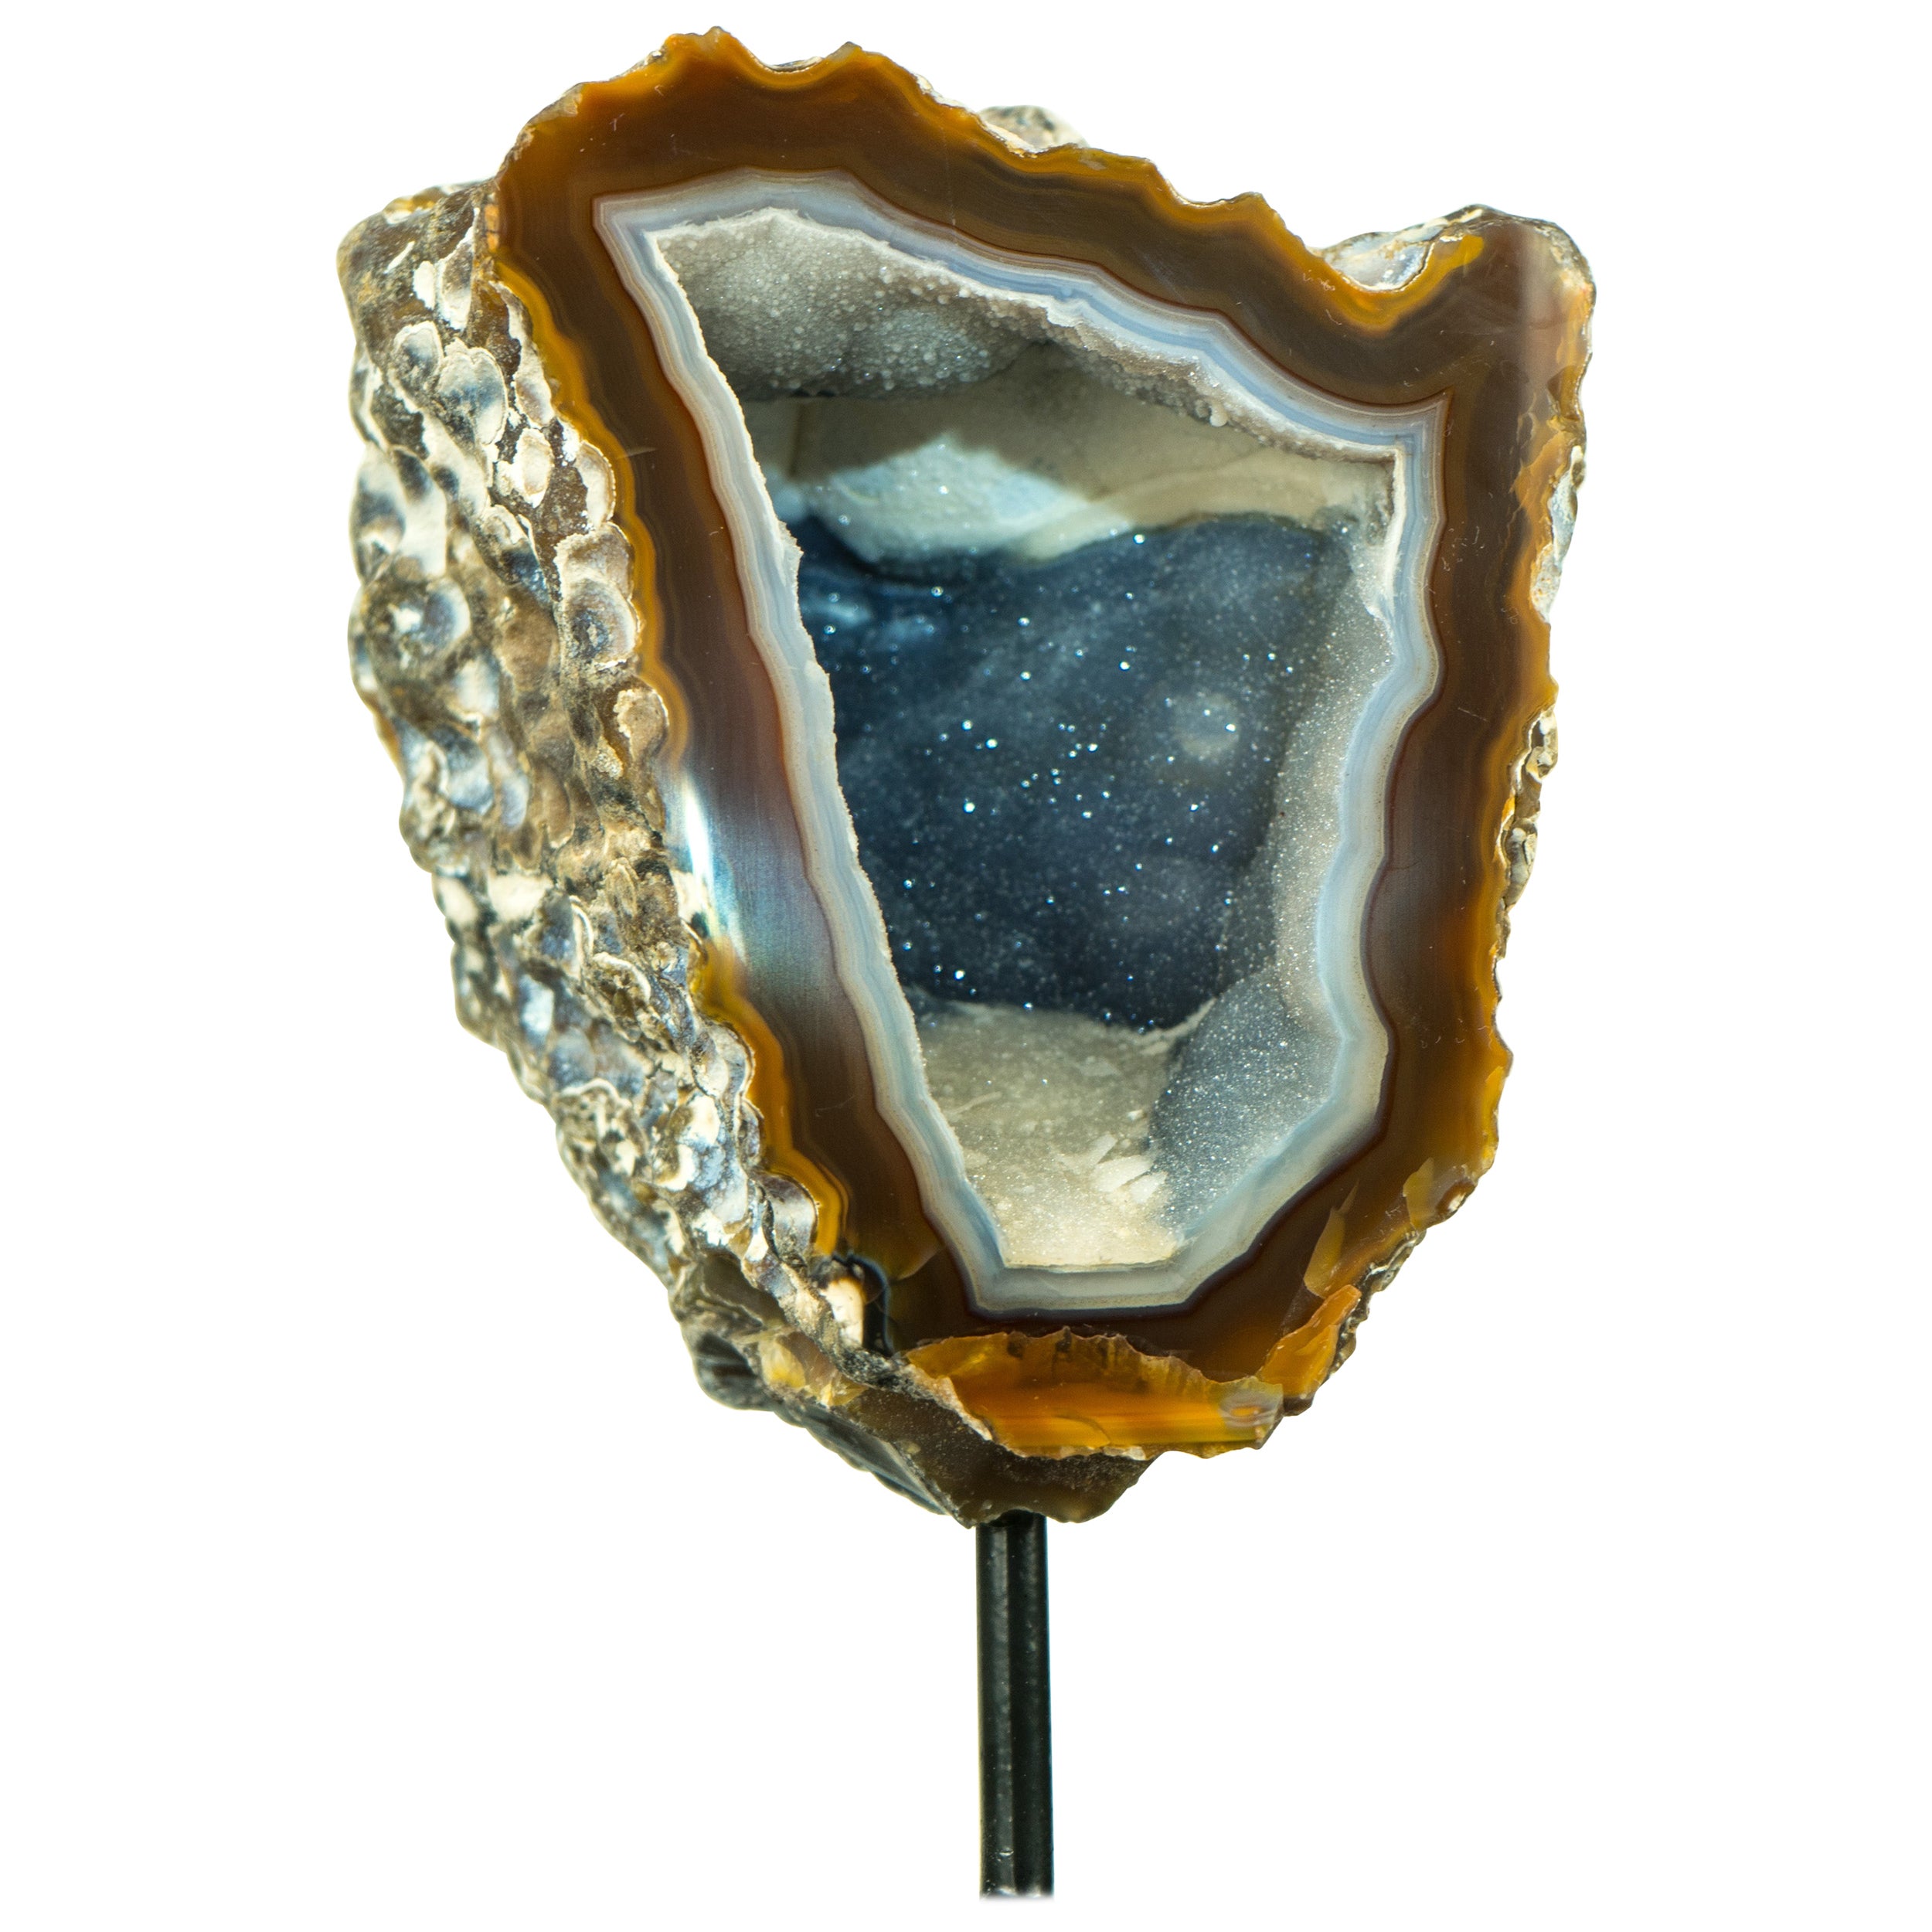 Gallery Grade Amber and White Lace Agate Geode with Blue Galaxy Druzy For Sale